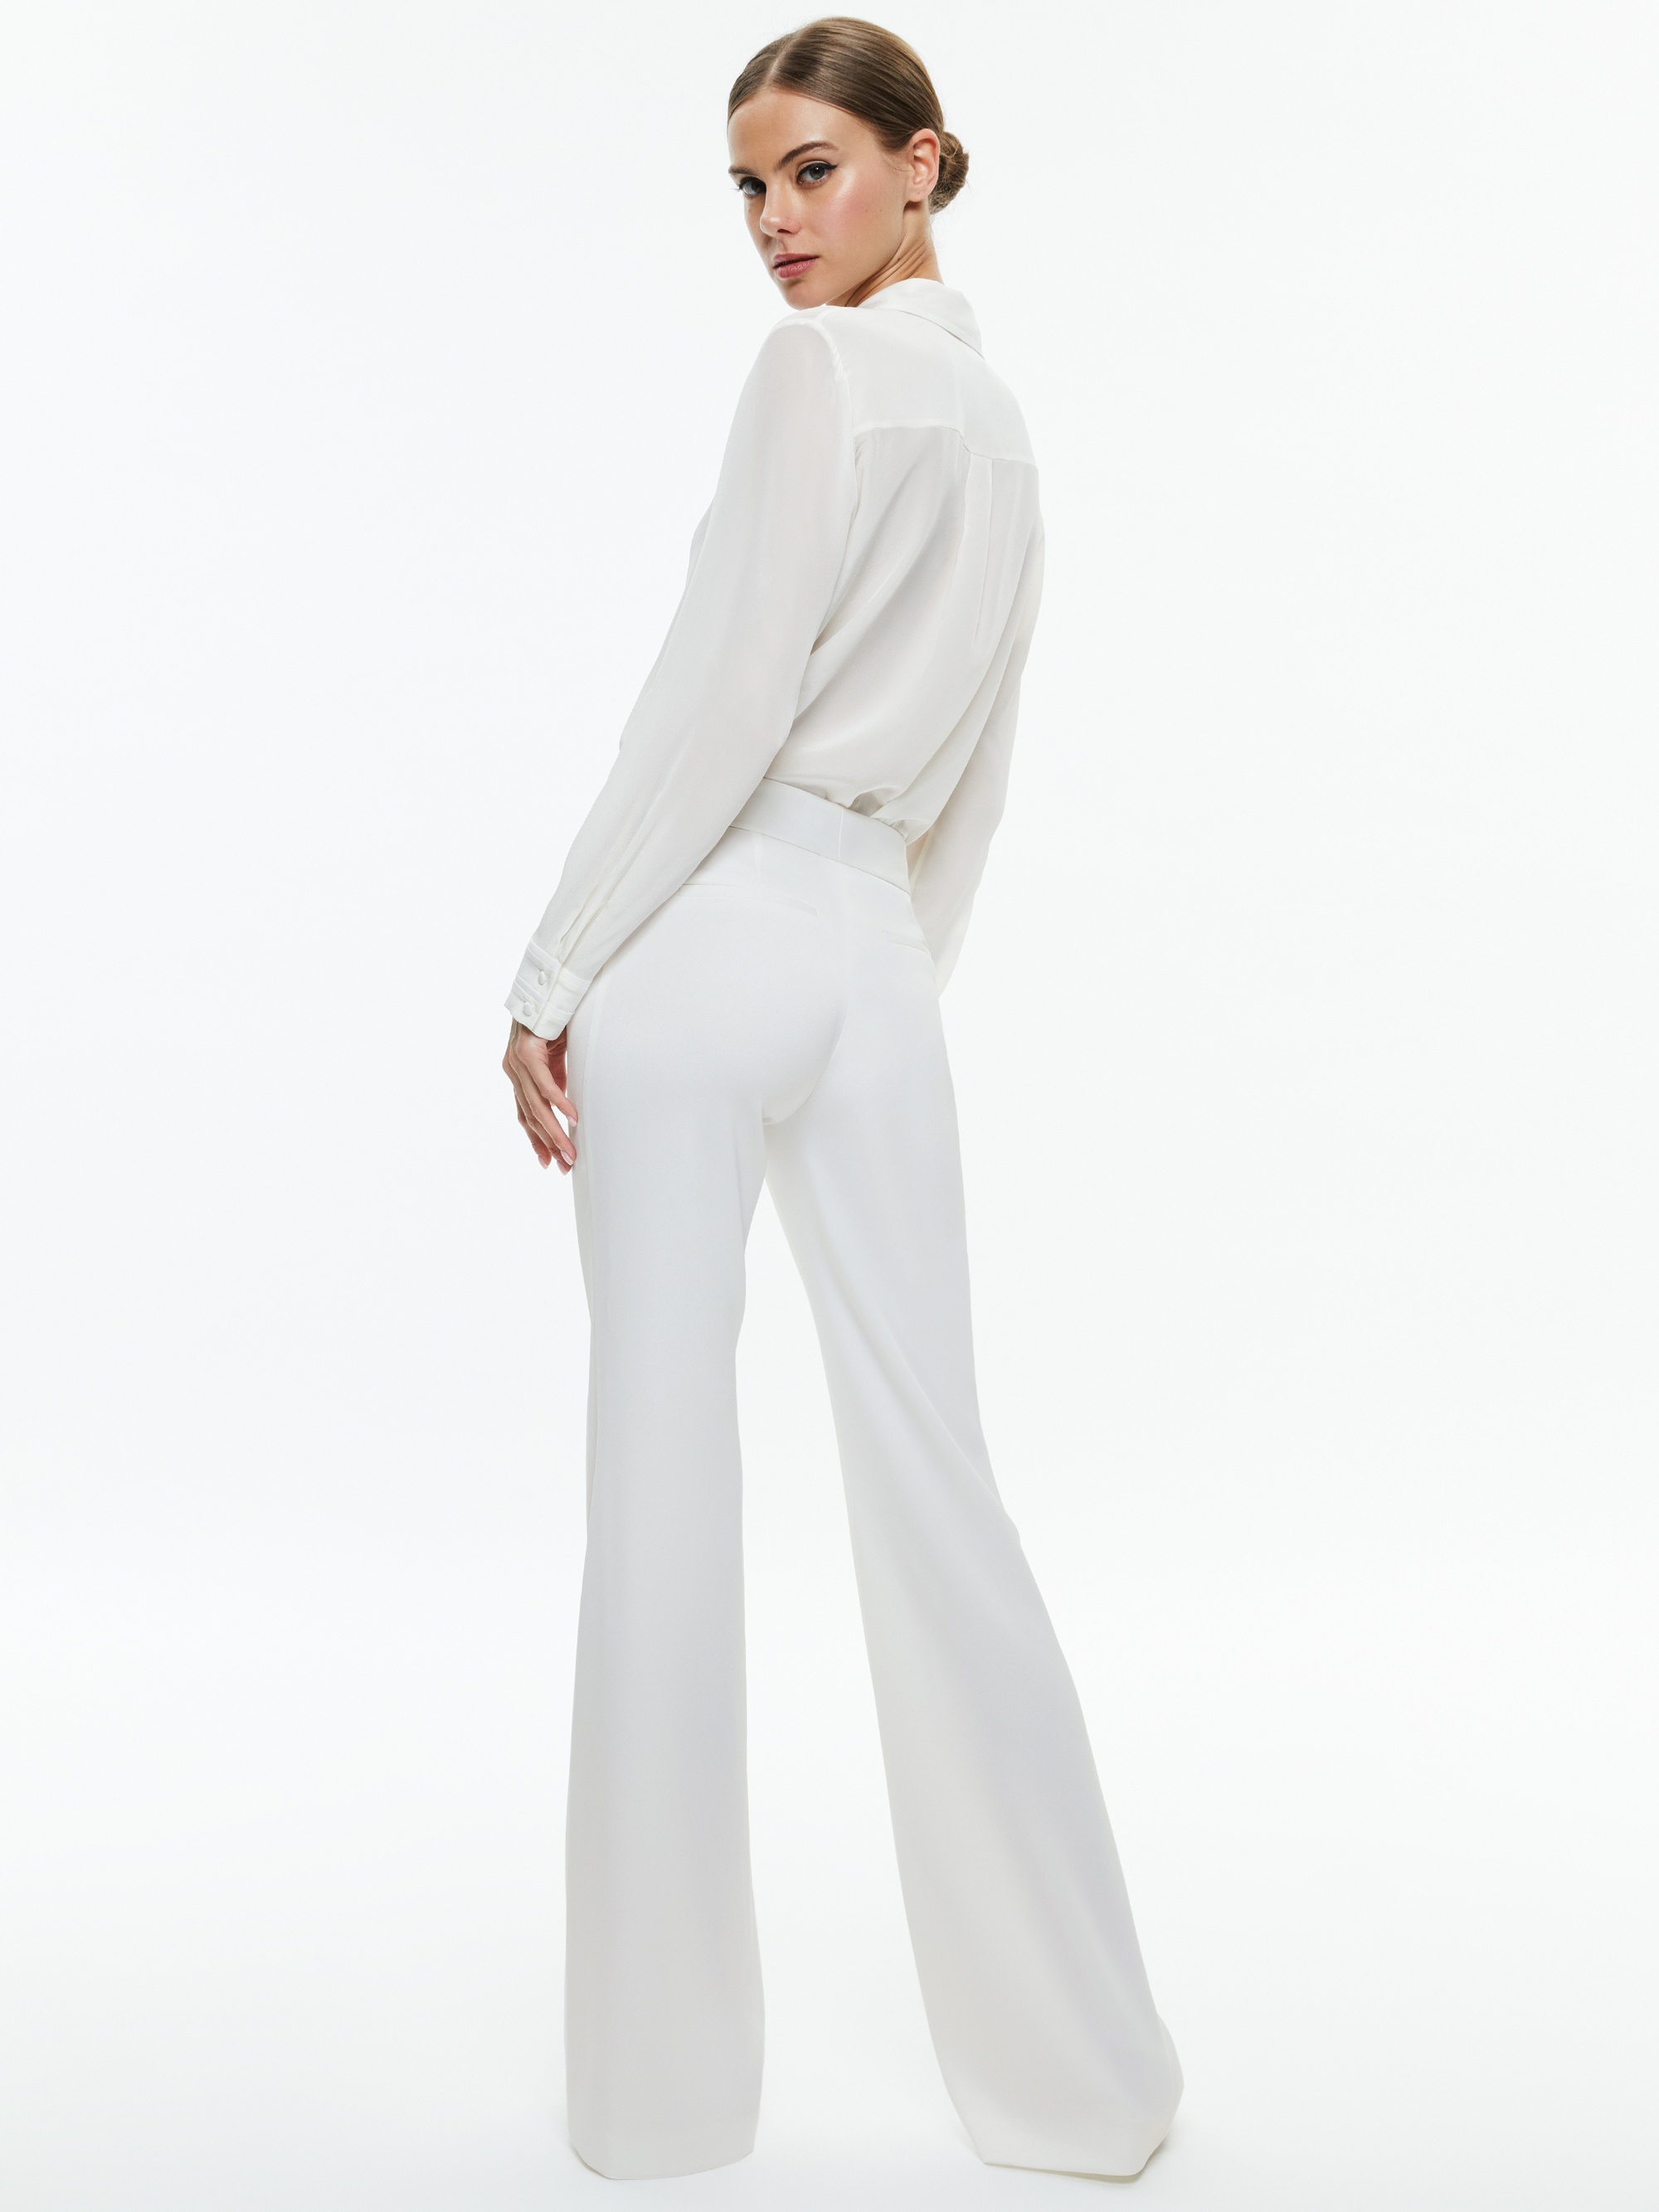 ANDREW MID RISE BOOTCUT PANT - 4